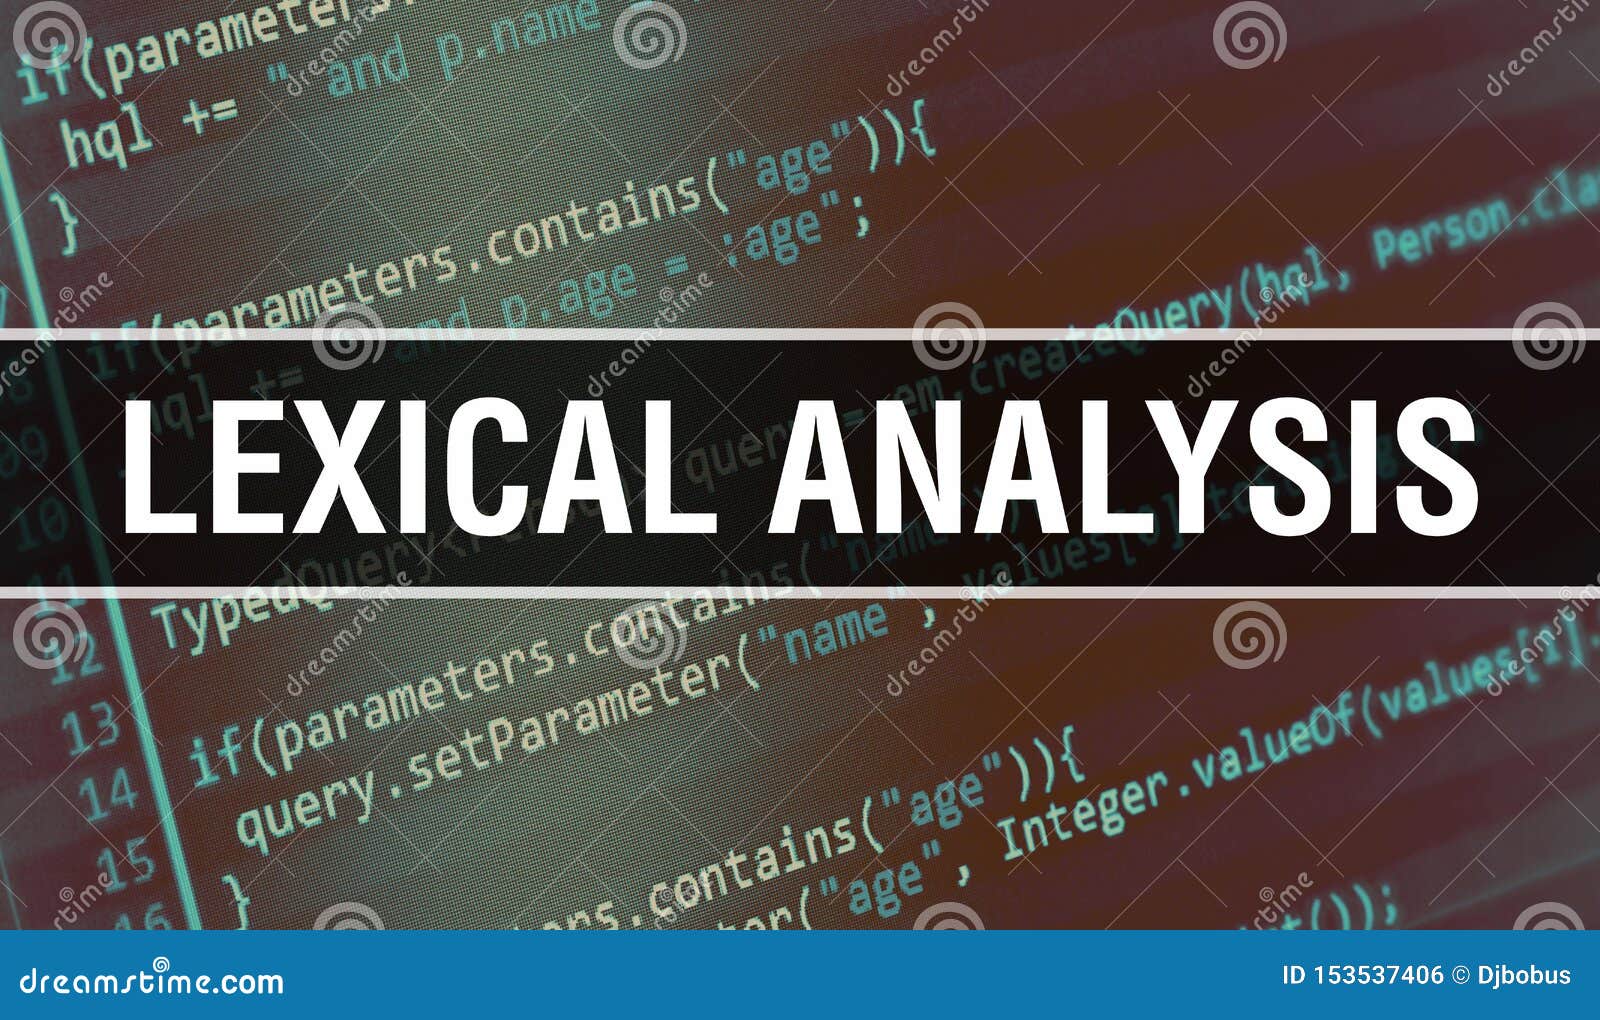 lexical analysis concept  using code for developing programs and app. lexical analysis website code with colorful tags